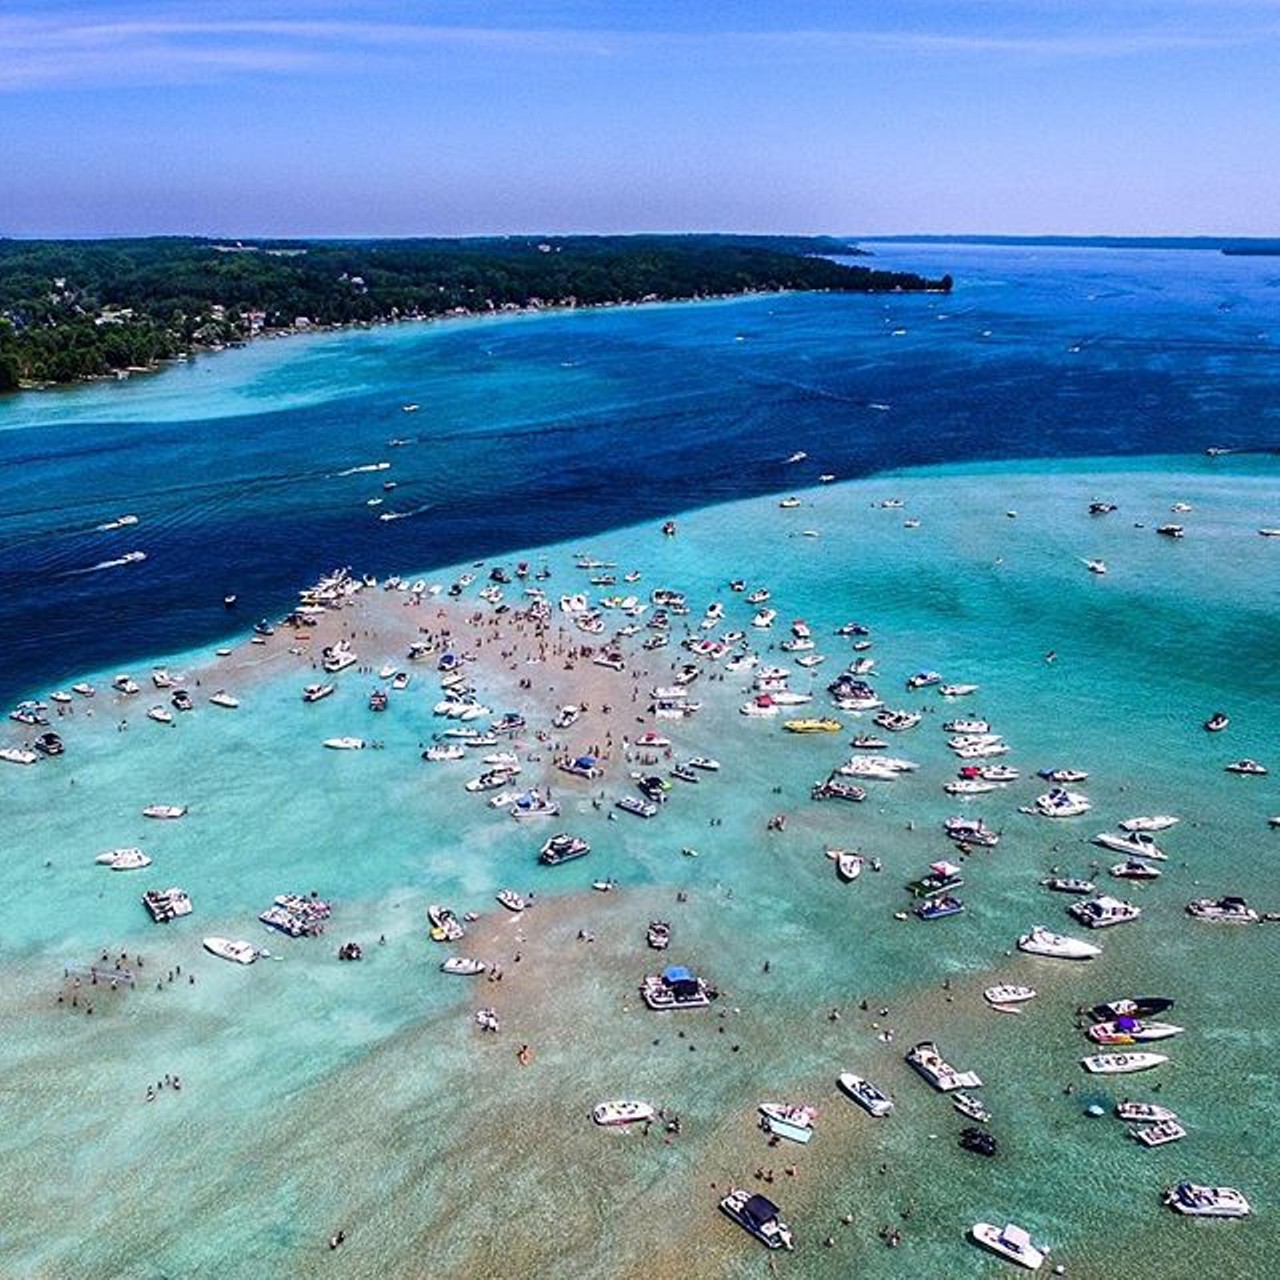 Torch Lake Michigan, Antrim County
Torch Lake stretches longer than any other inland body of water in Michigan with a continuous flow of water for 19 miles. Known for its clear water with a splash of turquoise it&#146;s perfect for every aquatic adventure you had in mind.(Photo via Instagram, @detroitinvaderz)